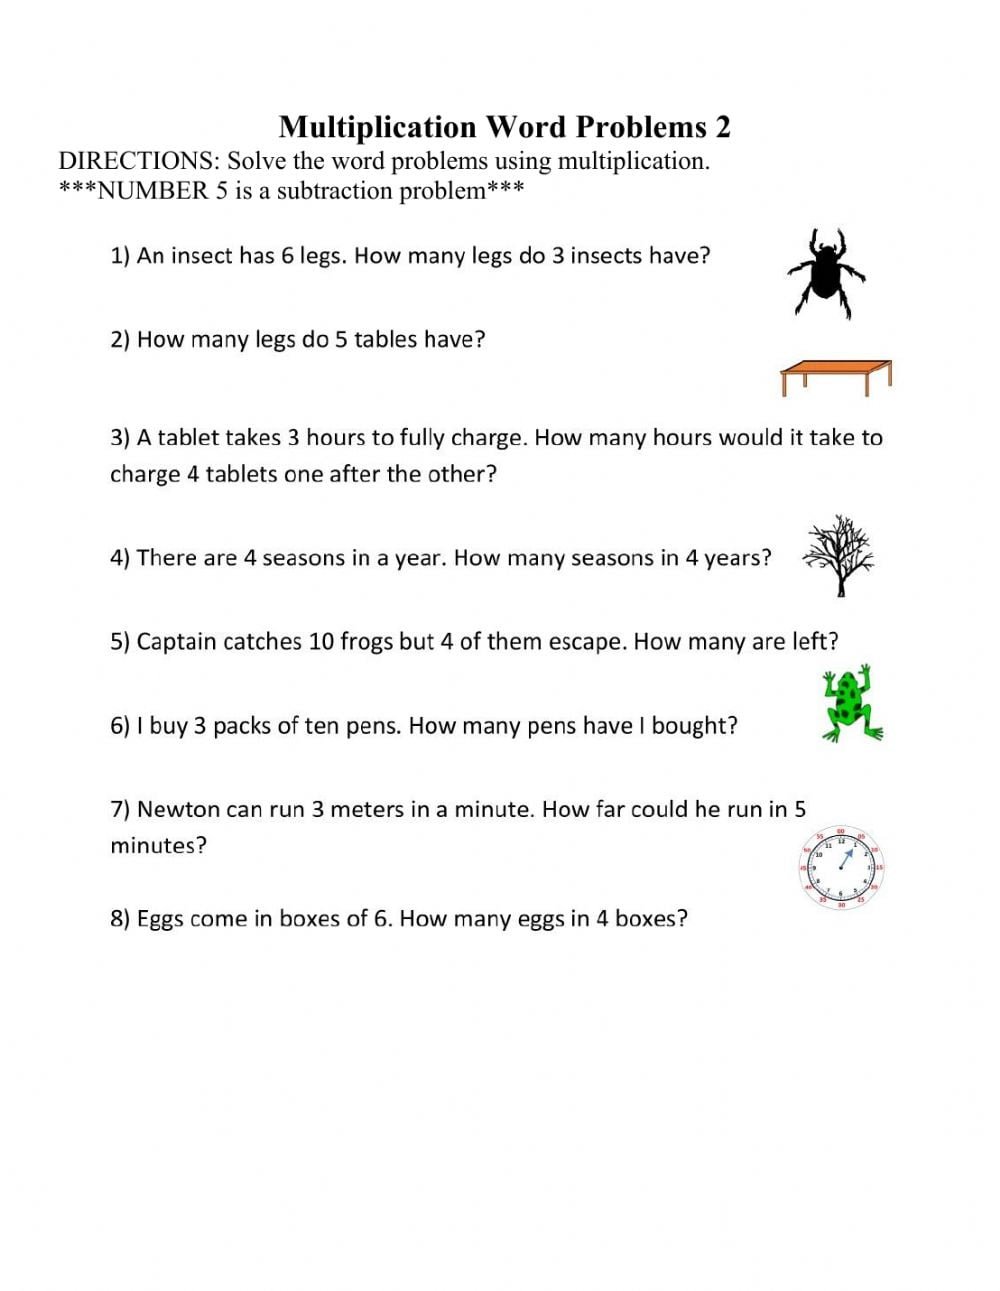 5 Multiplication Word Problems